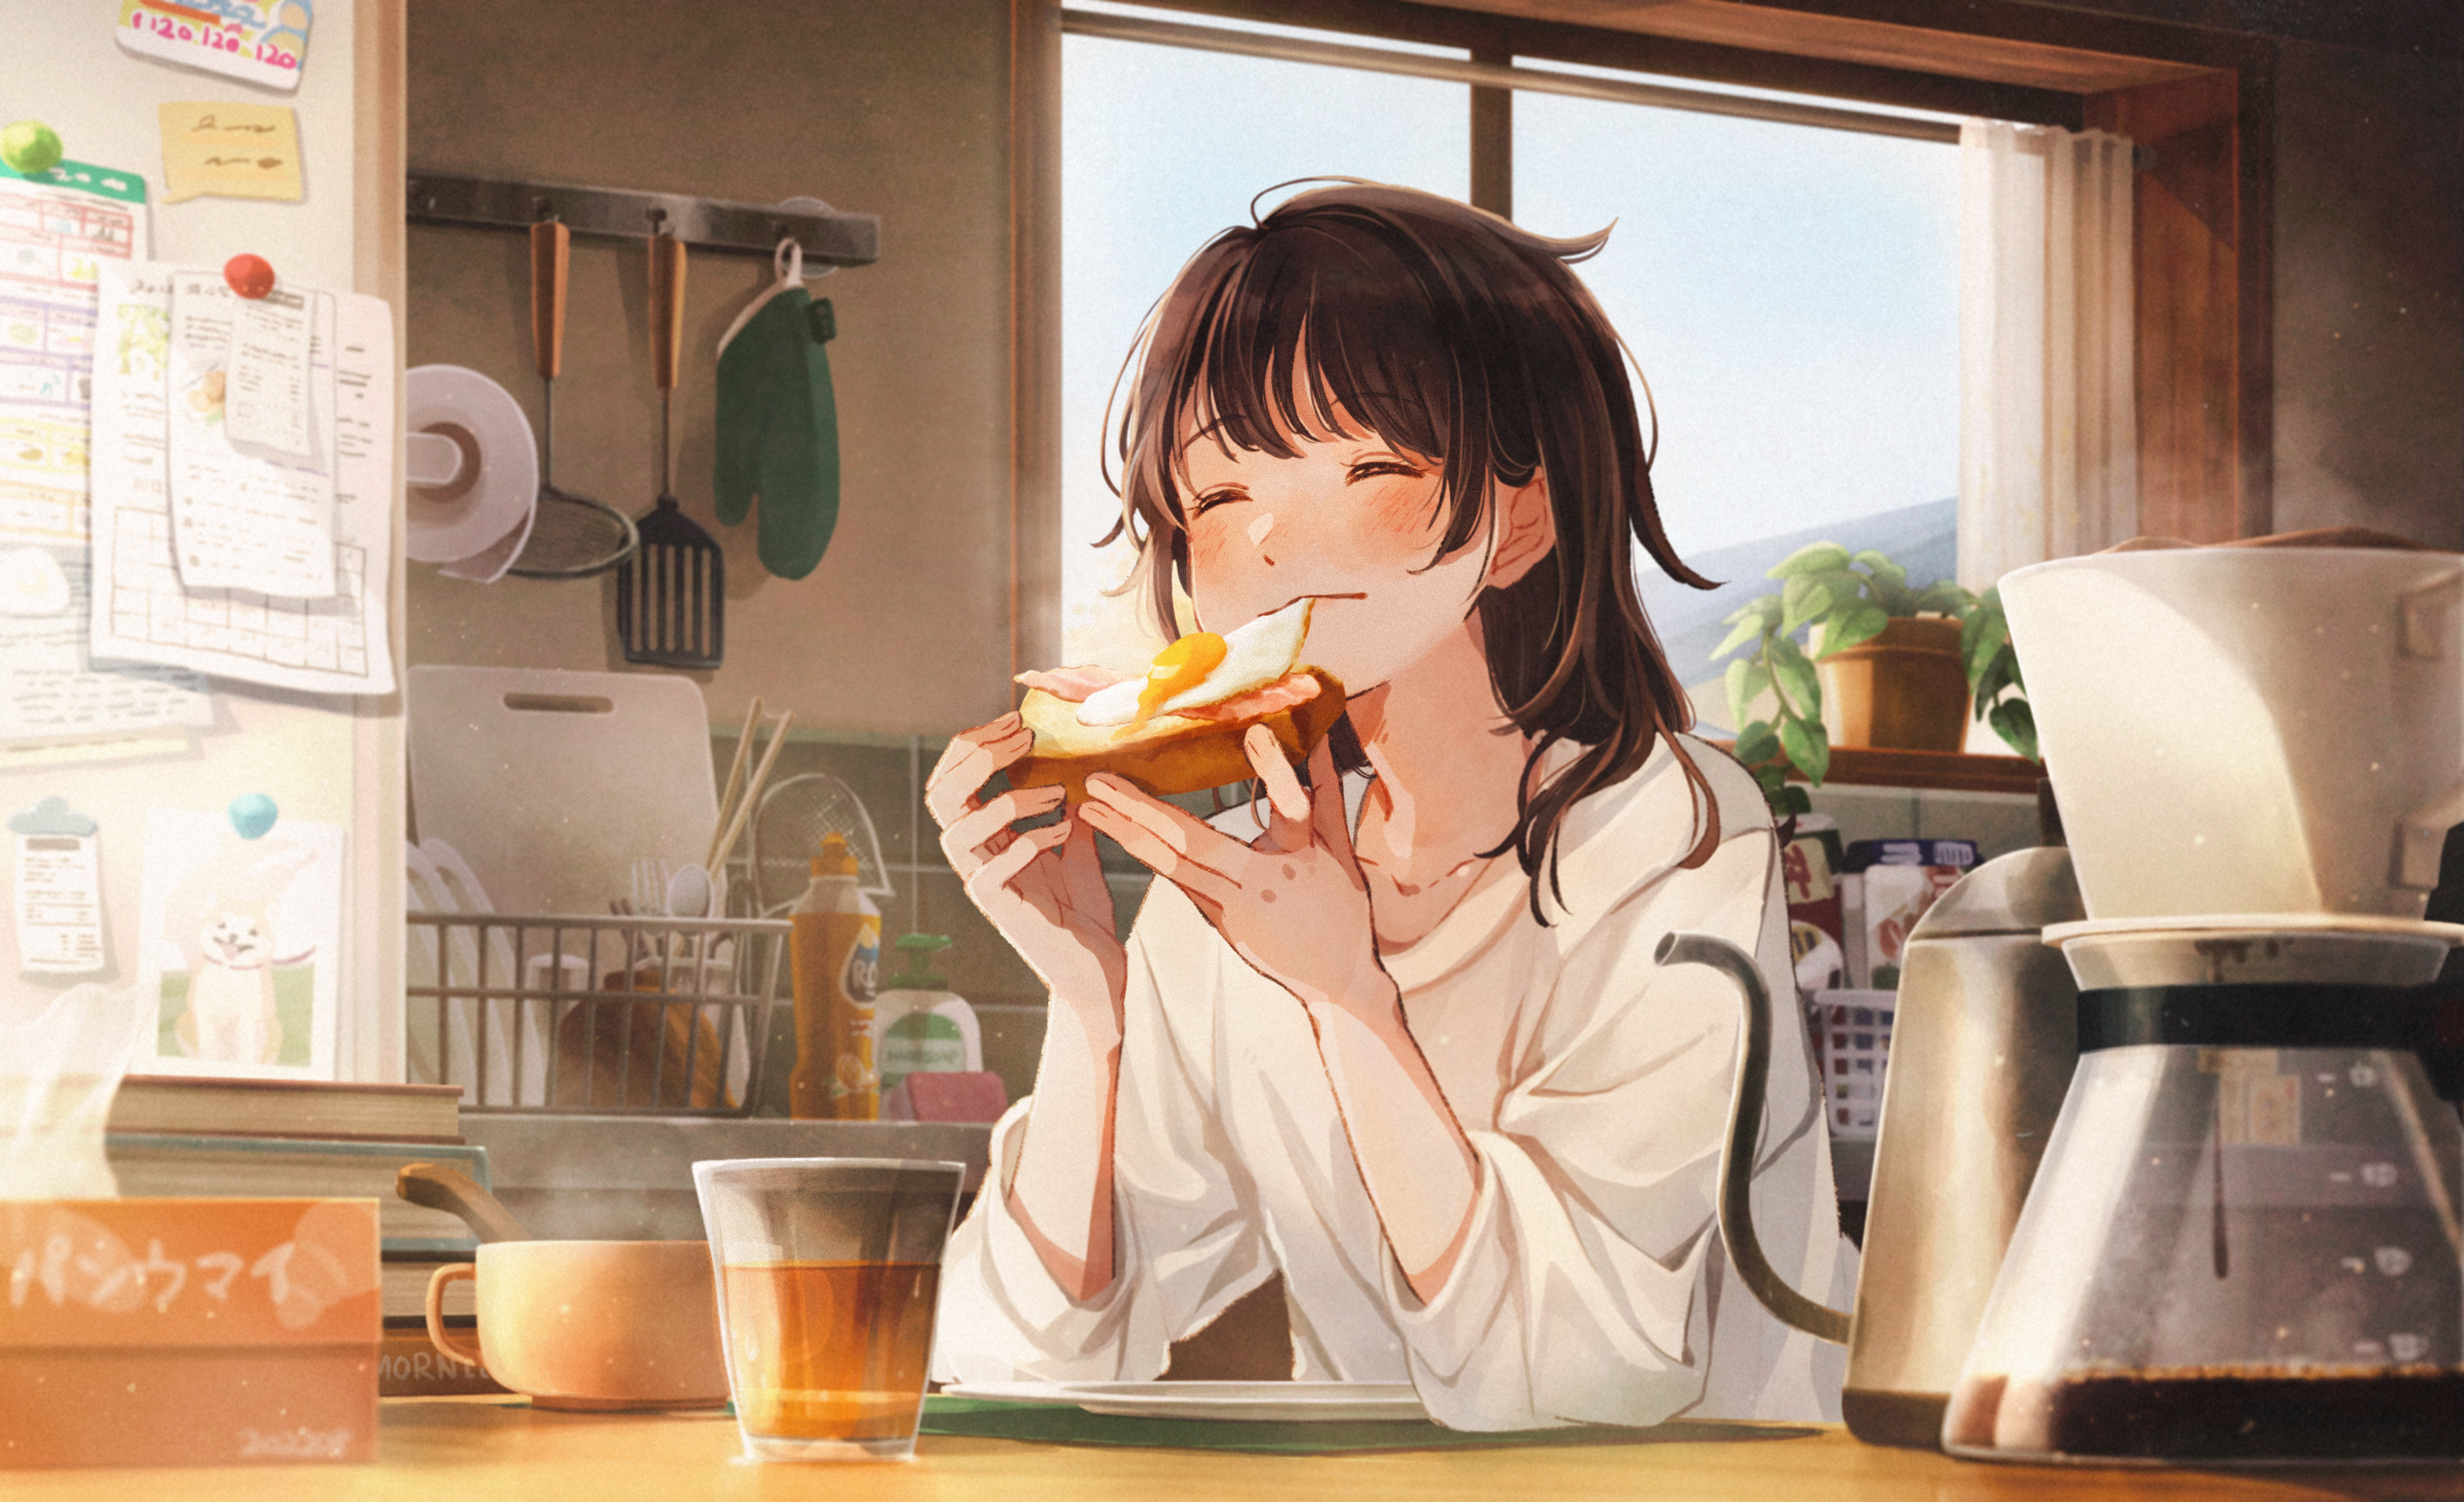 closed eyes, anime girls, toast, eggs, food, coffee, anime girls eating |  3014x1837 Wallpaper - wallhaven.cc